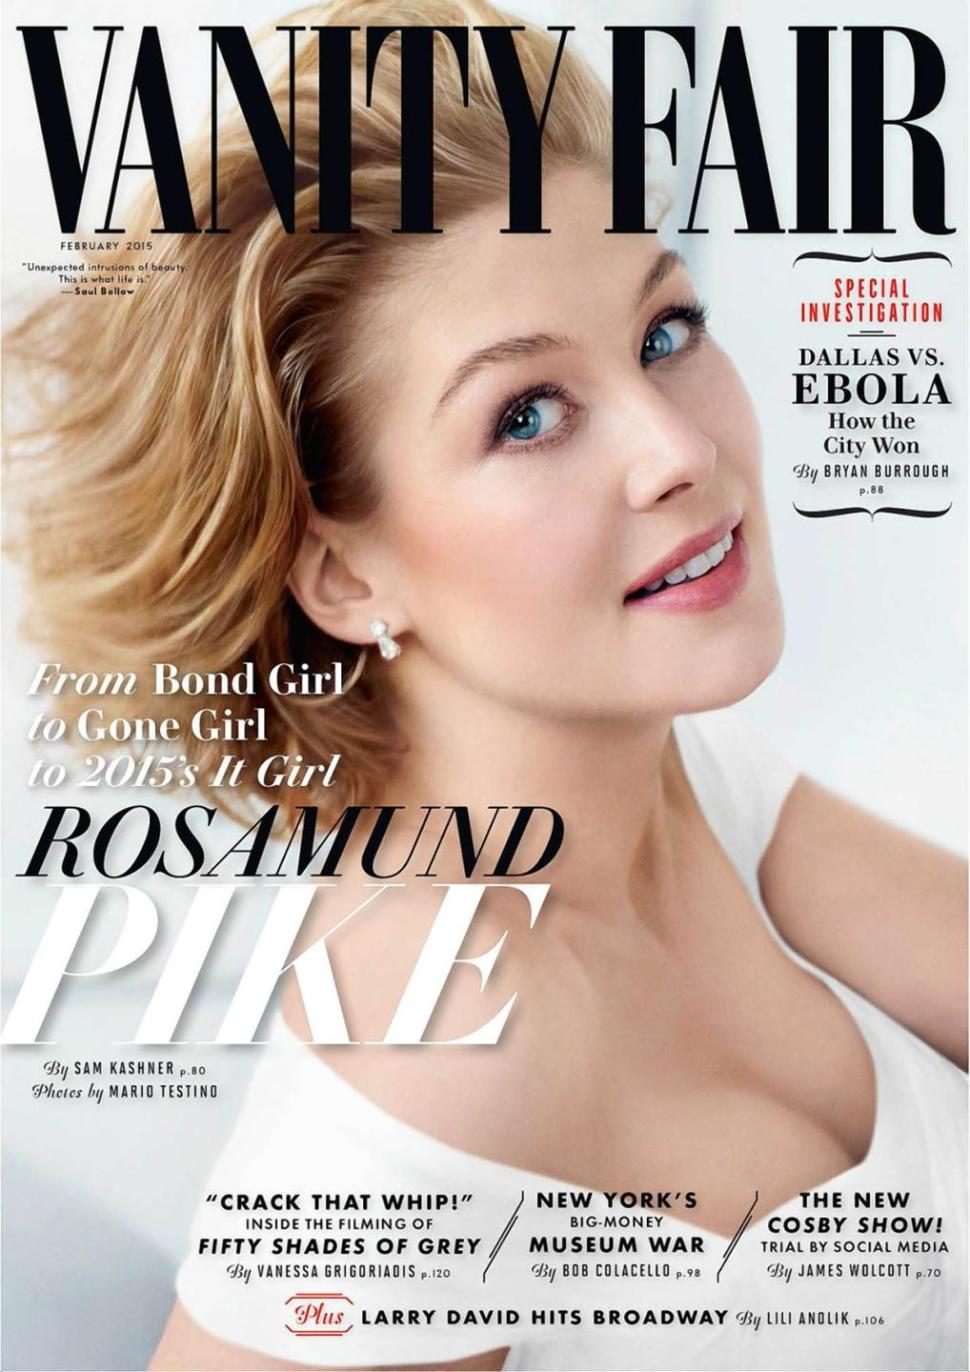 Rosamund Pike gets coverage in the February Vanity Fair.